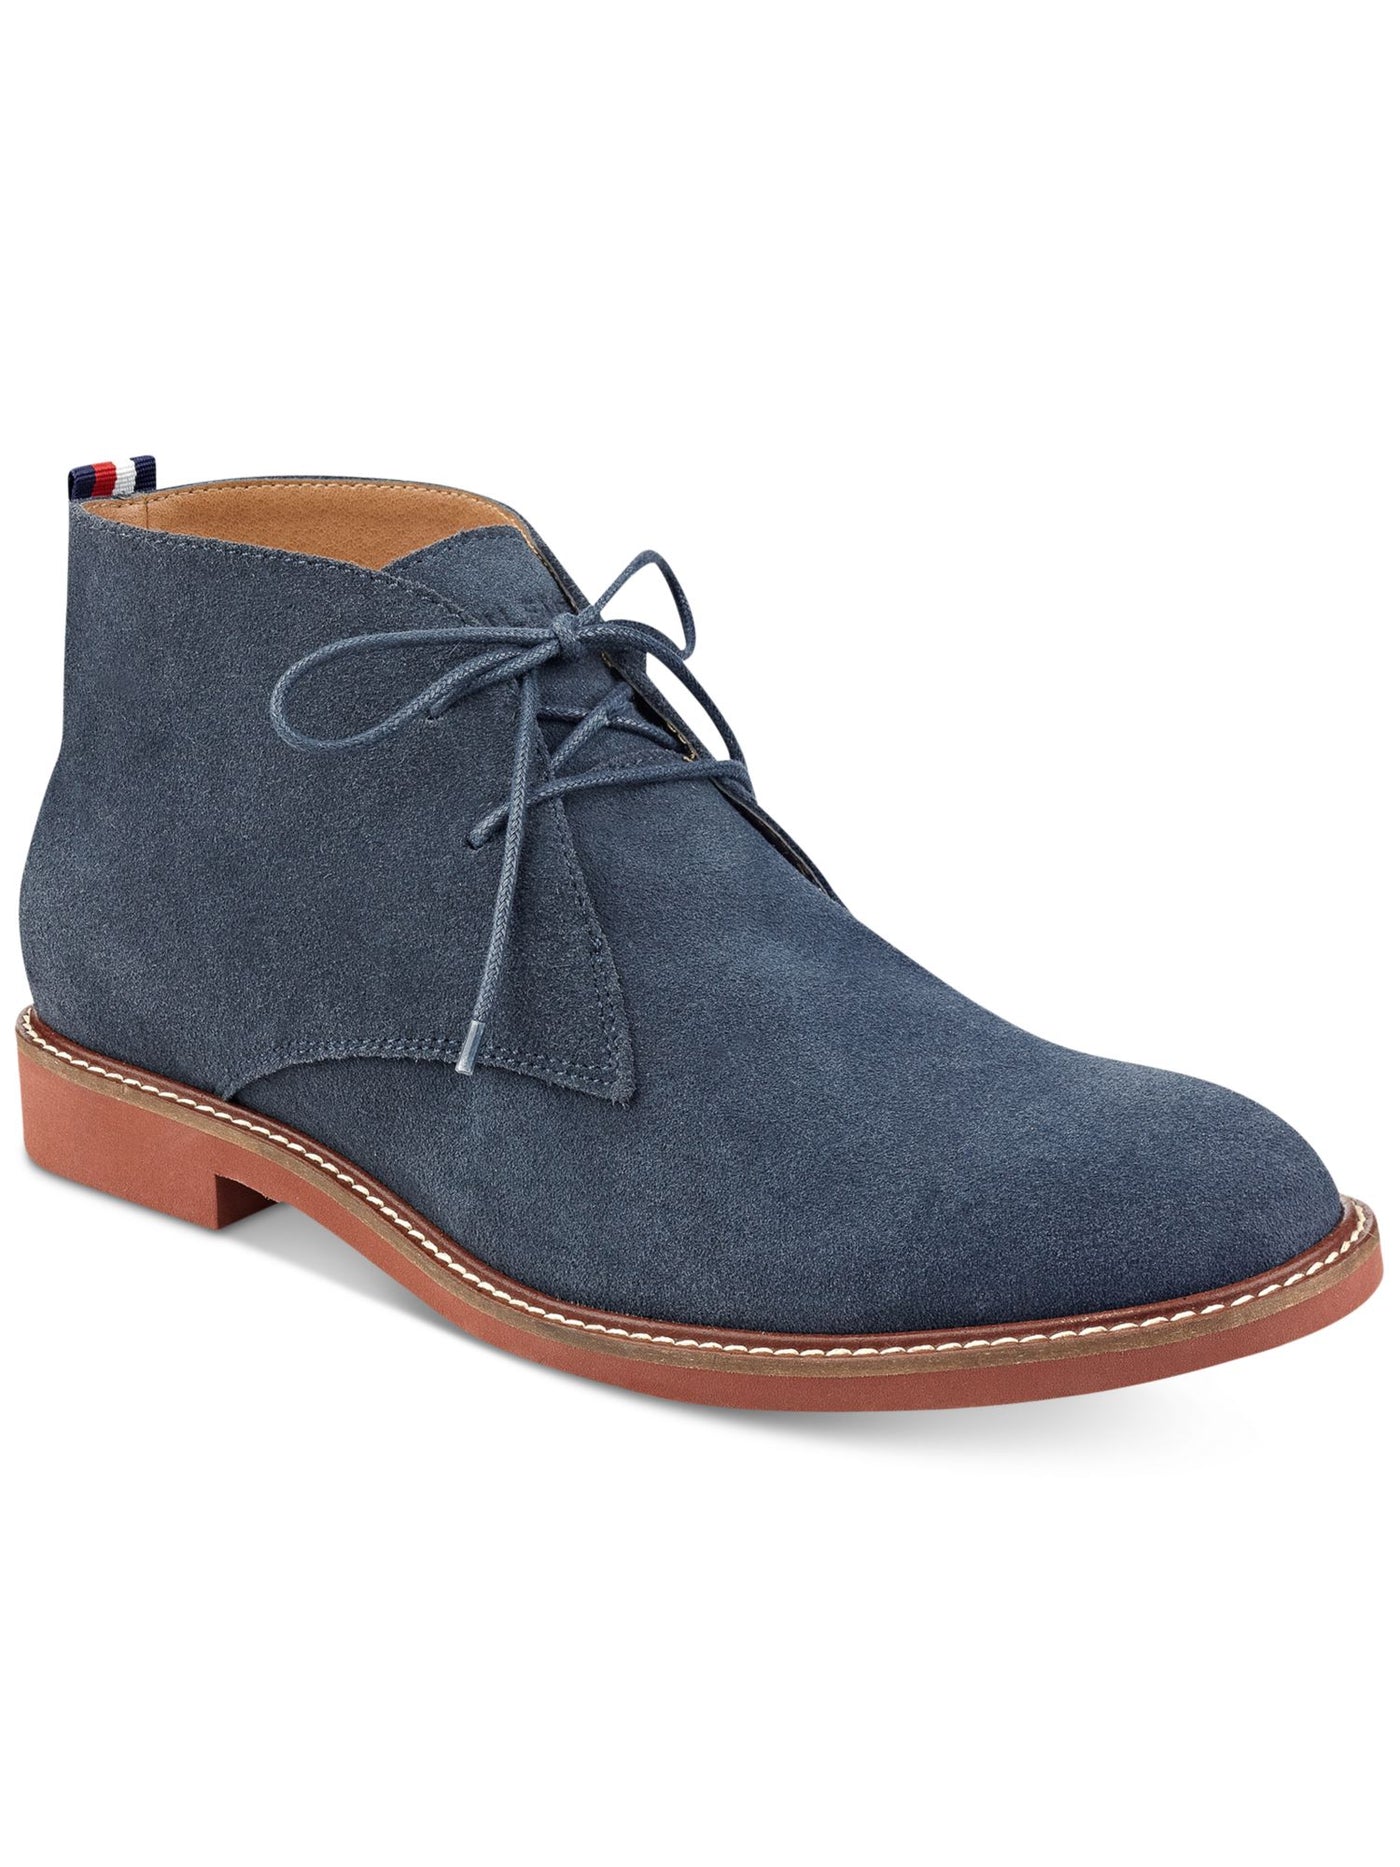 TOMMY HILFIGER Mens Blue Cushioned Lightweight Gervis Round Toe Block Heel Lace-Up Leather Chukka Boots 11